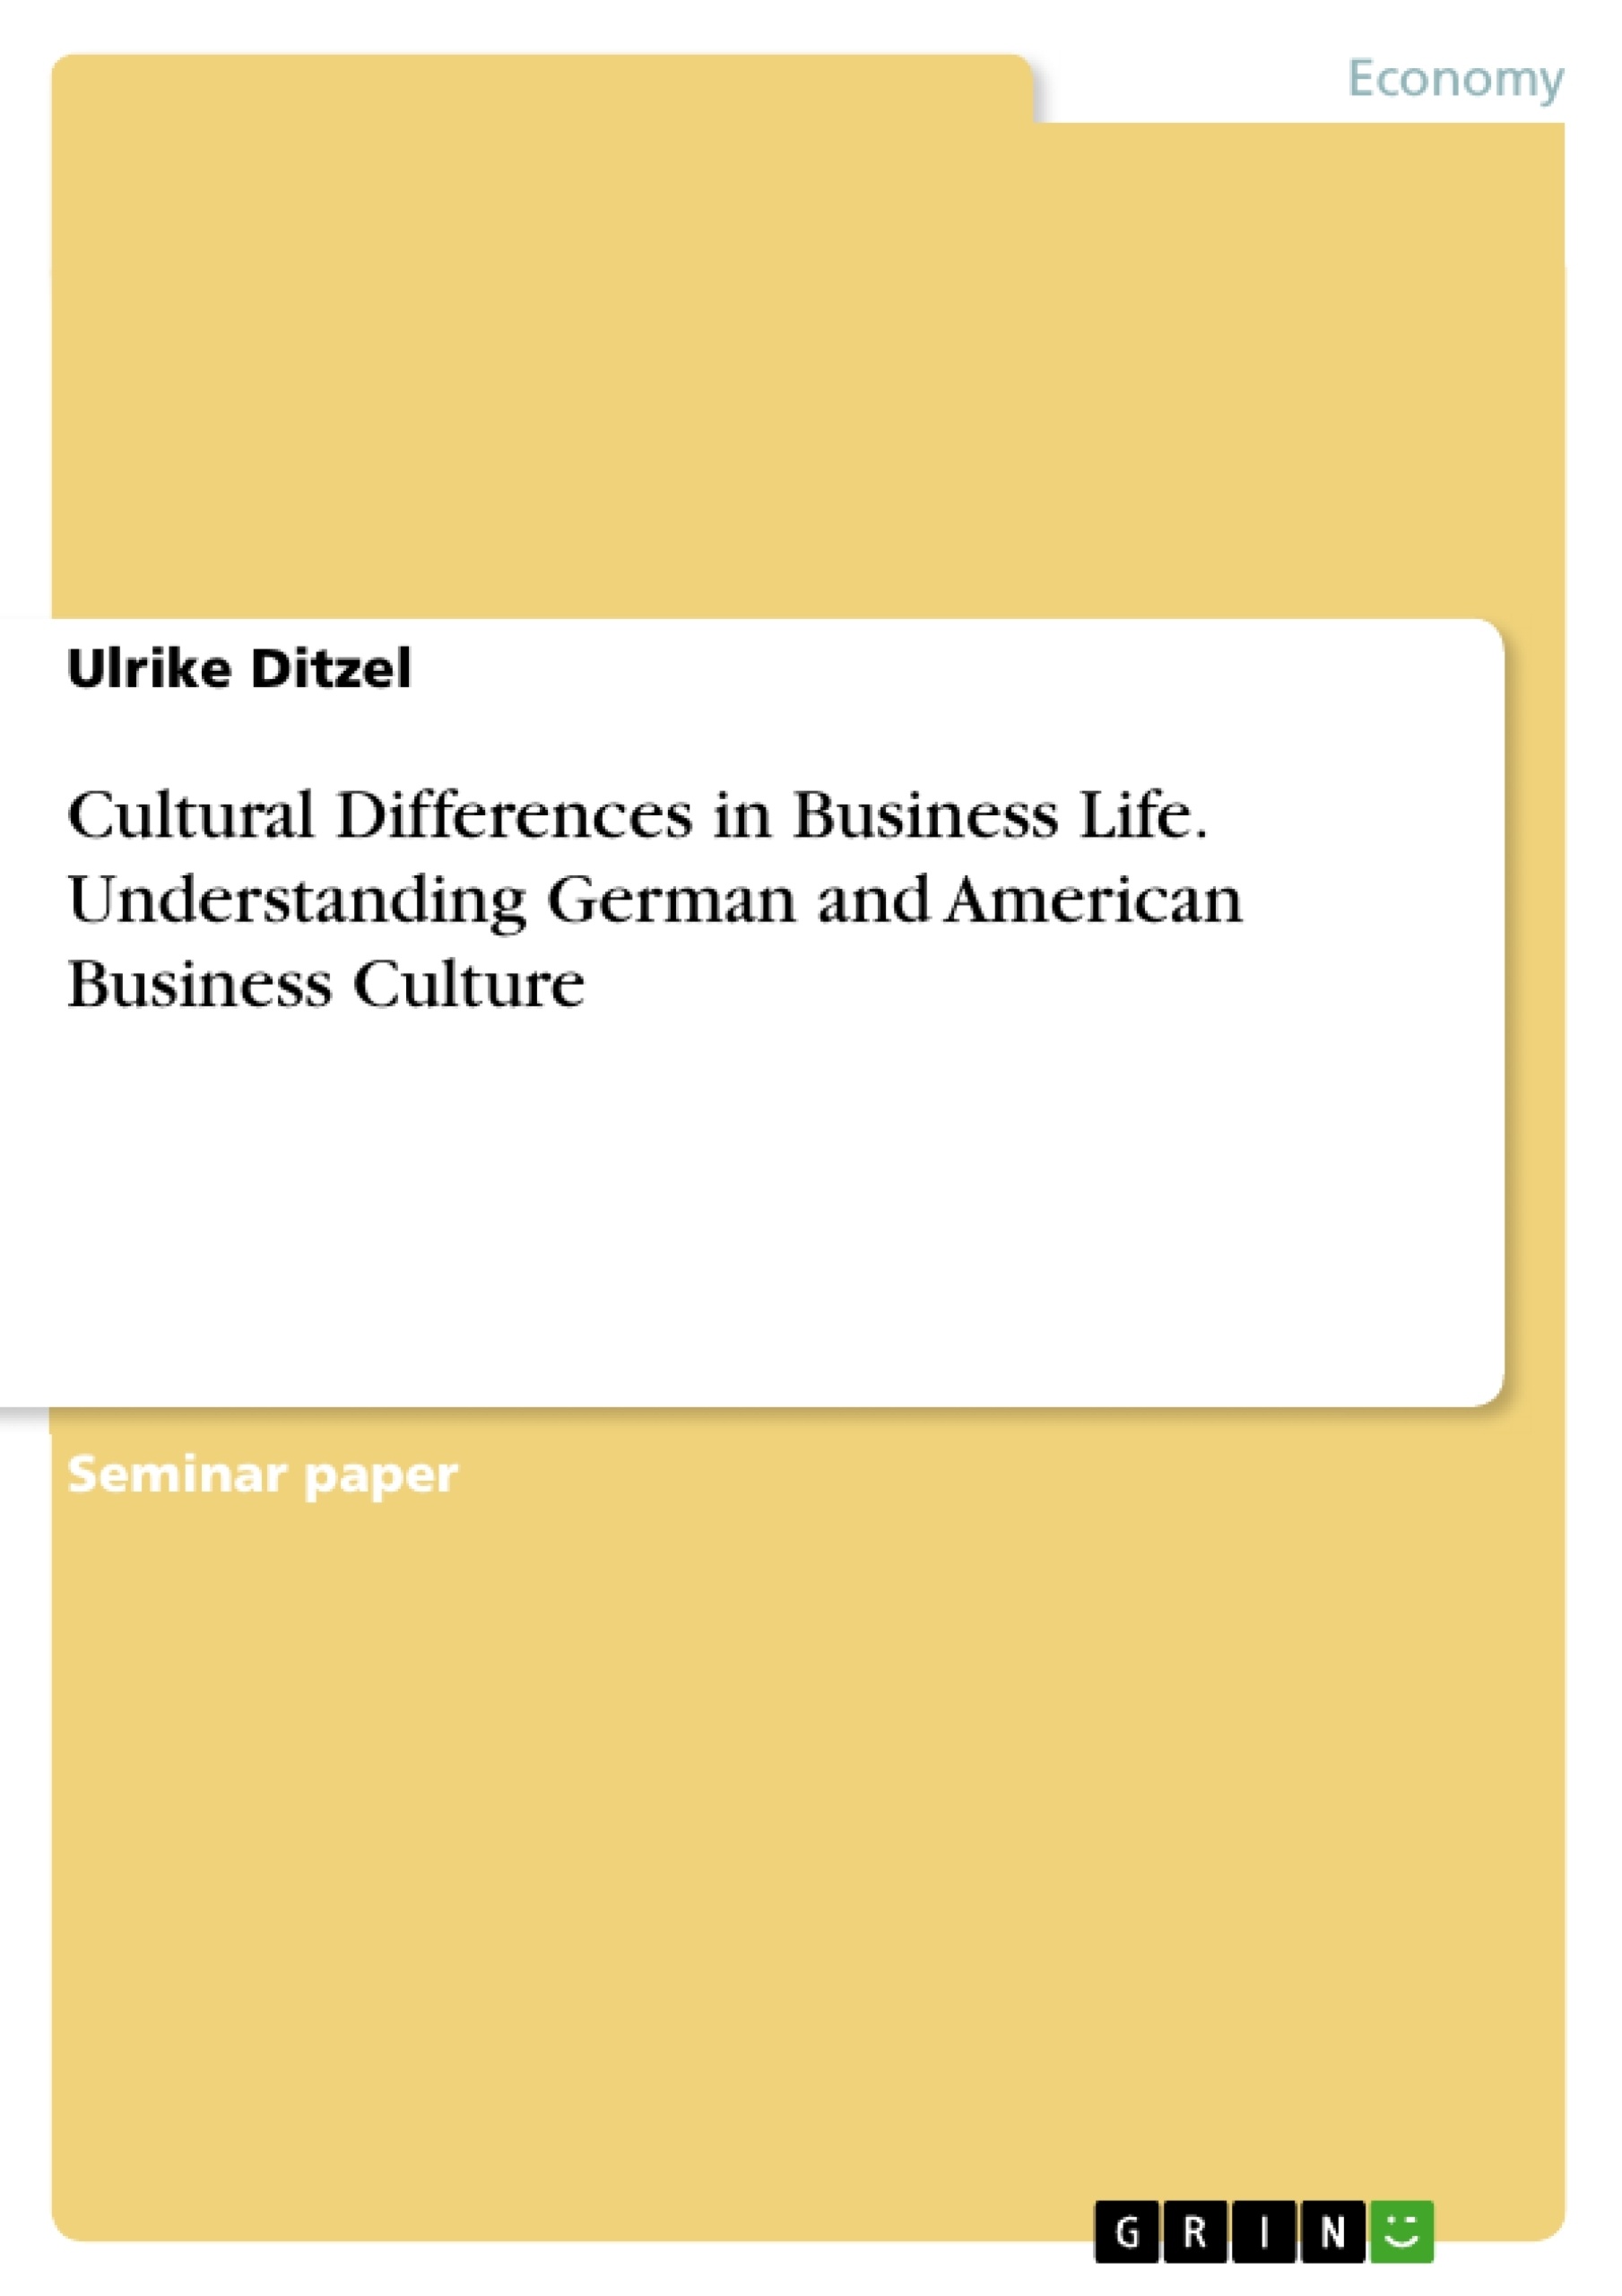 Title: Cultural Differences in Business Life. Understanding German and American Business Culture